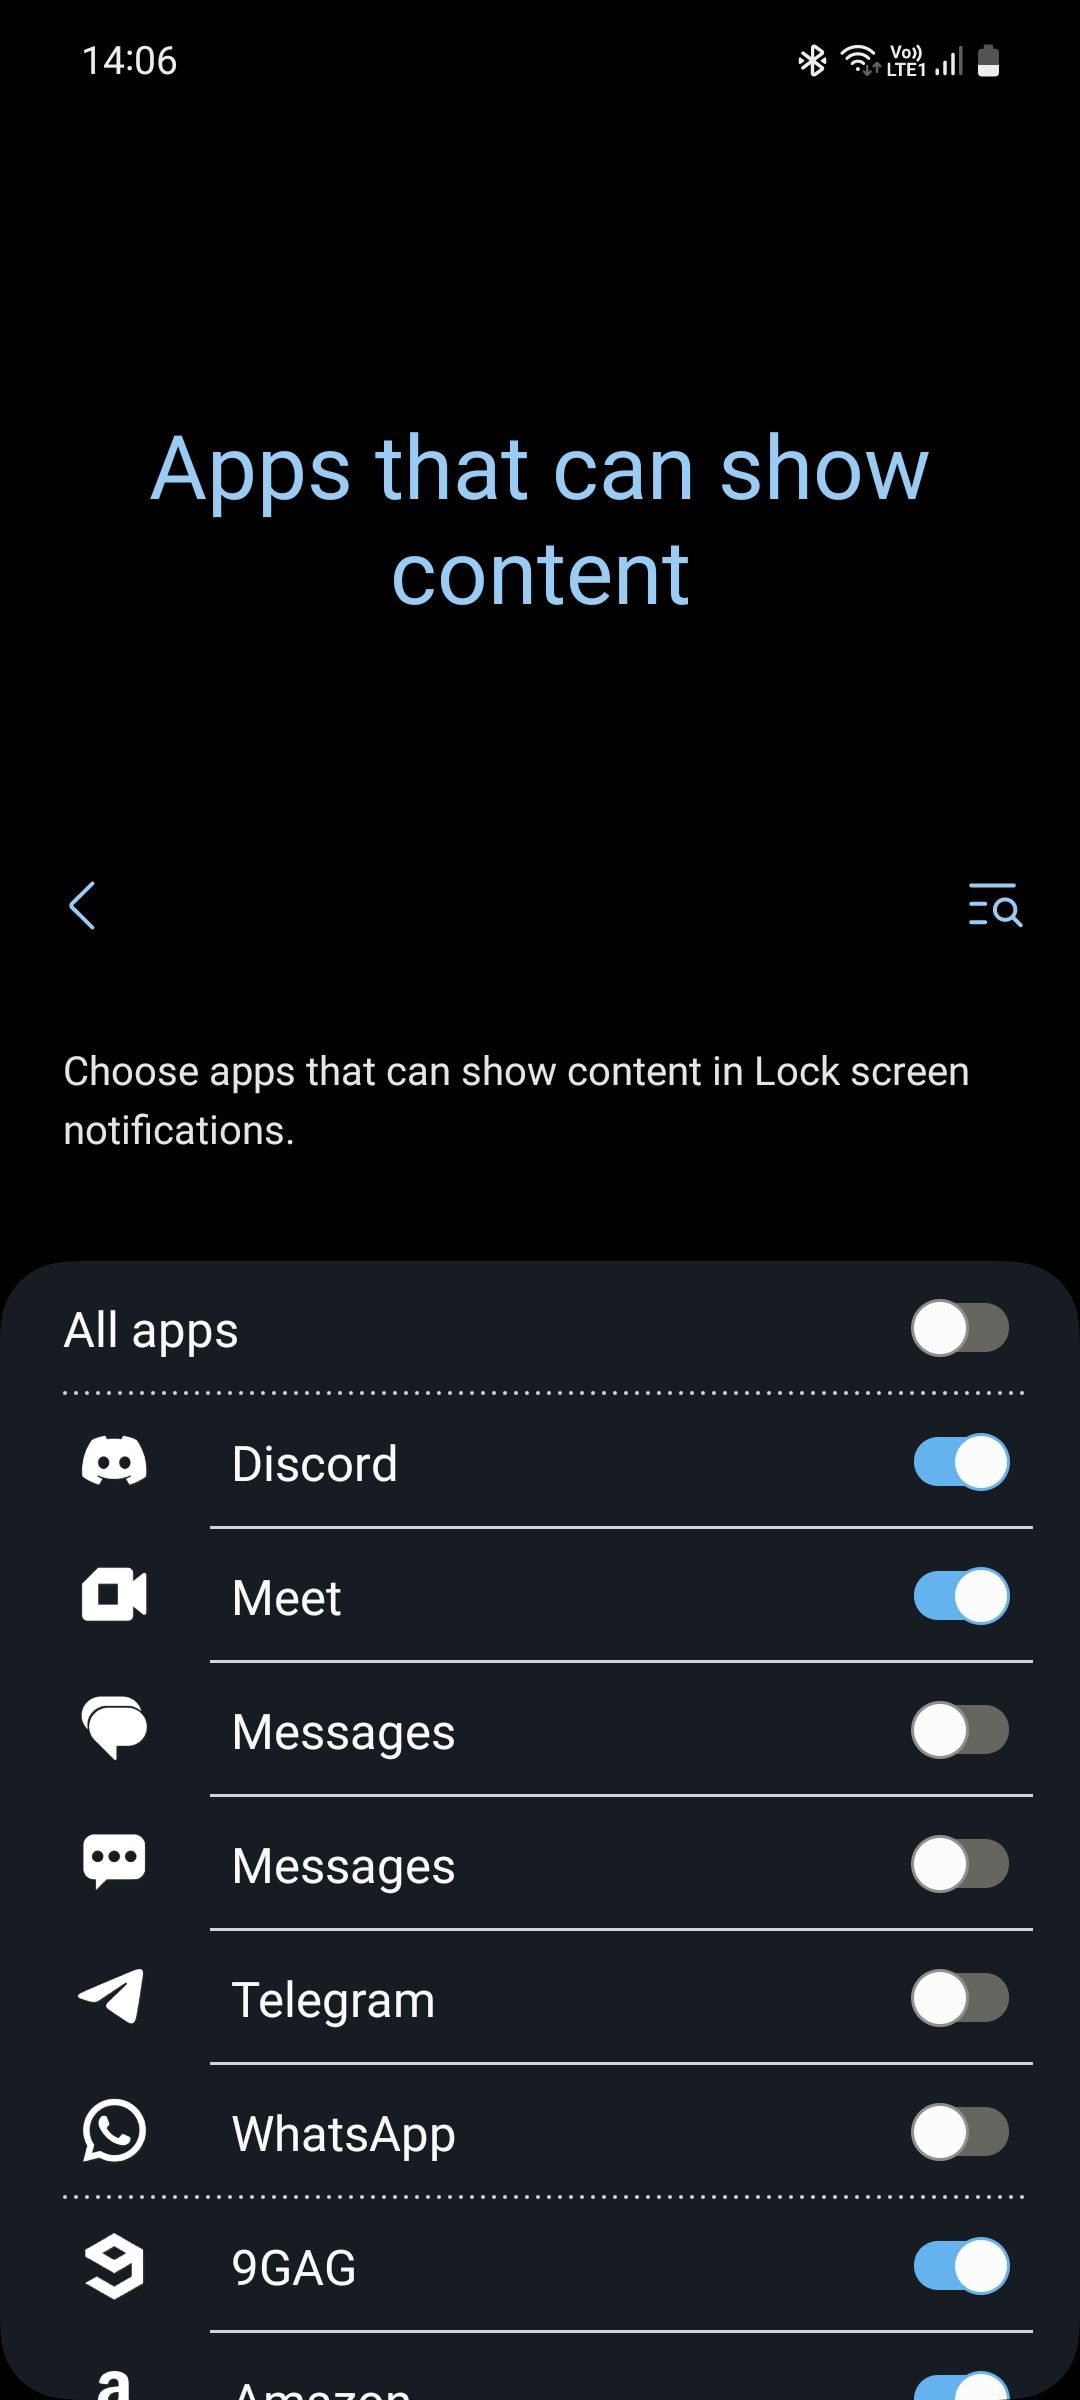 Samsung One UI show Lock screen notifications content from select apps